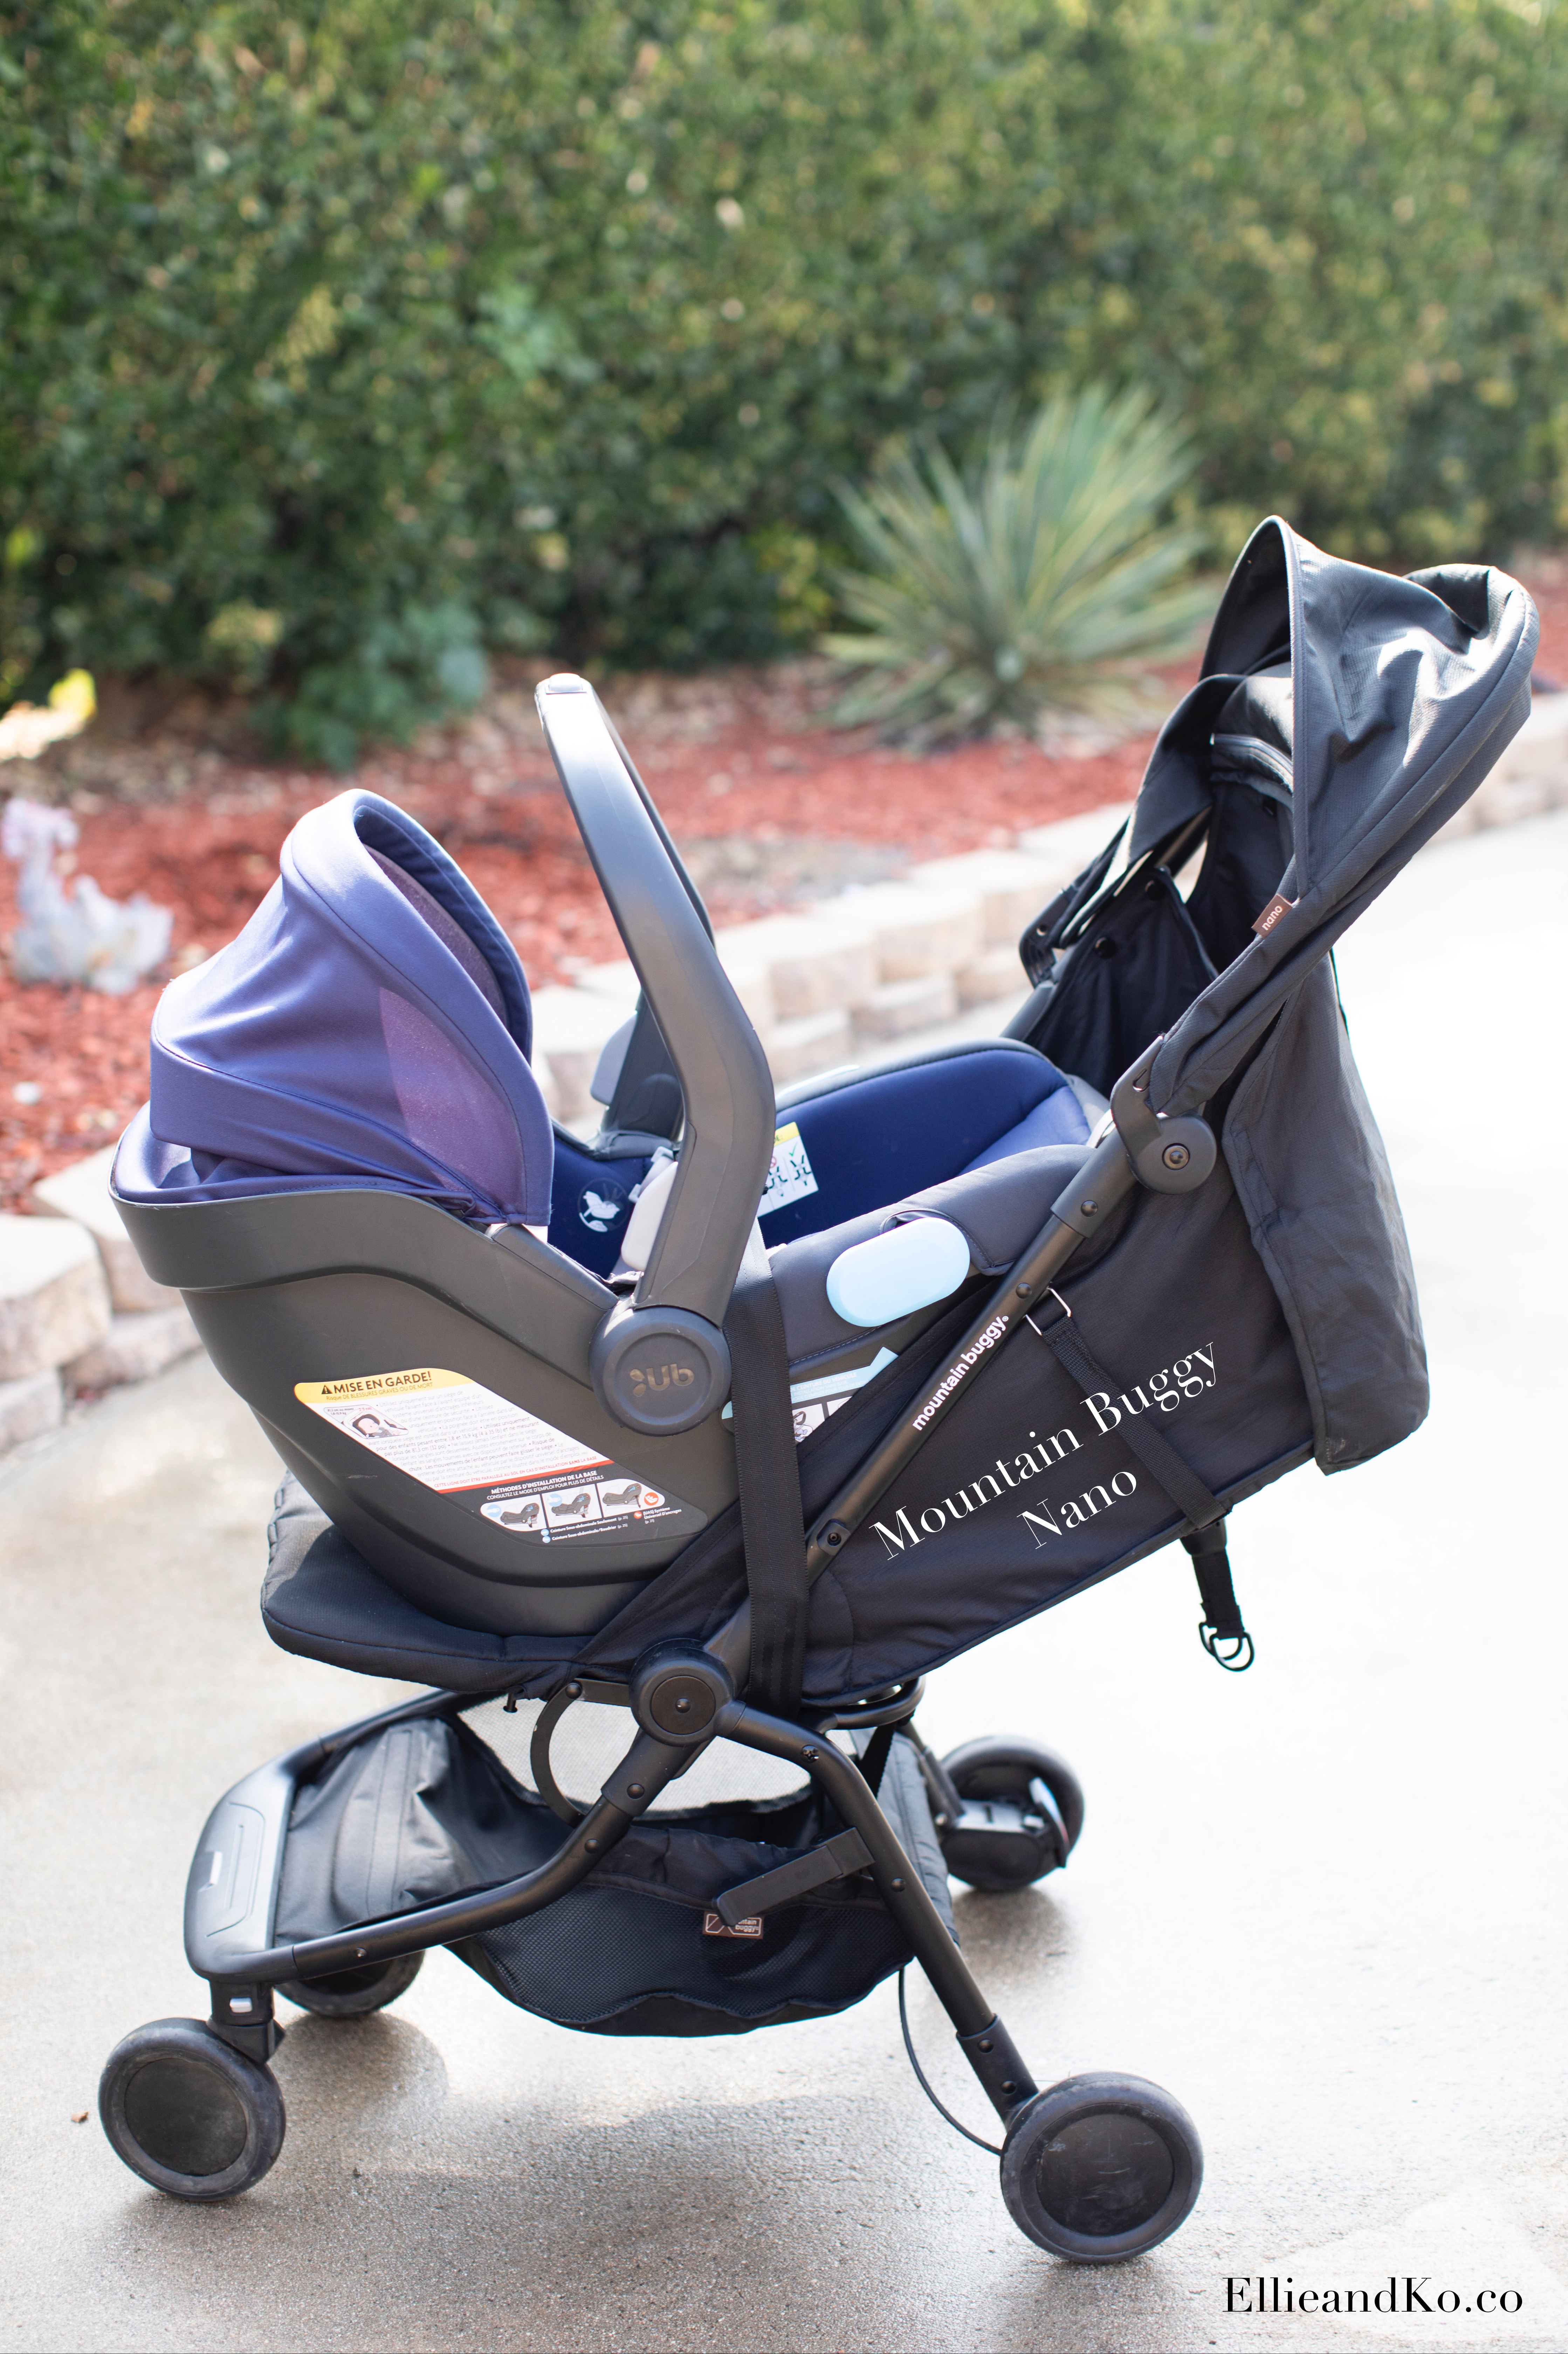 Compact Travel Stroller Review. A detailed review and comparison of the Mountain Buggy Nano vs. Zoe XLC. This detailed review tells you everything you need to know about compact travel strollers.